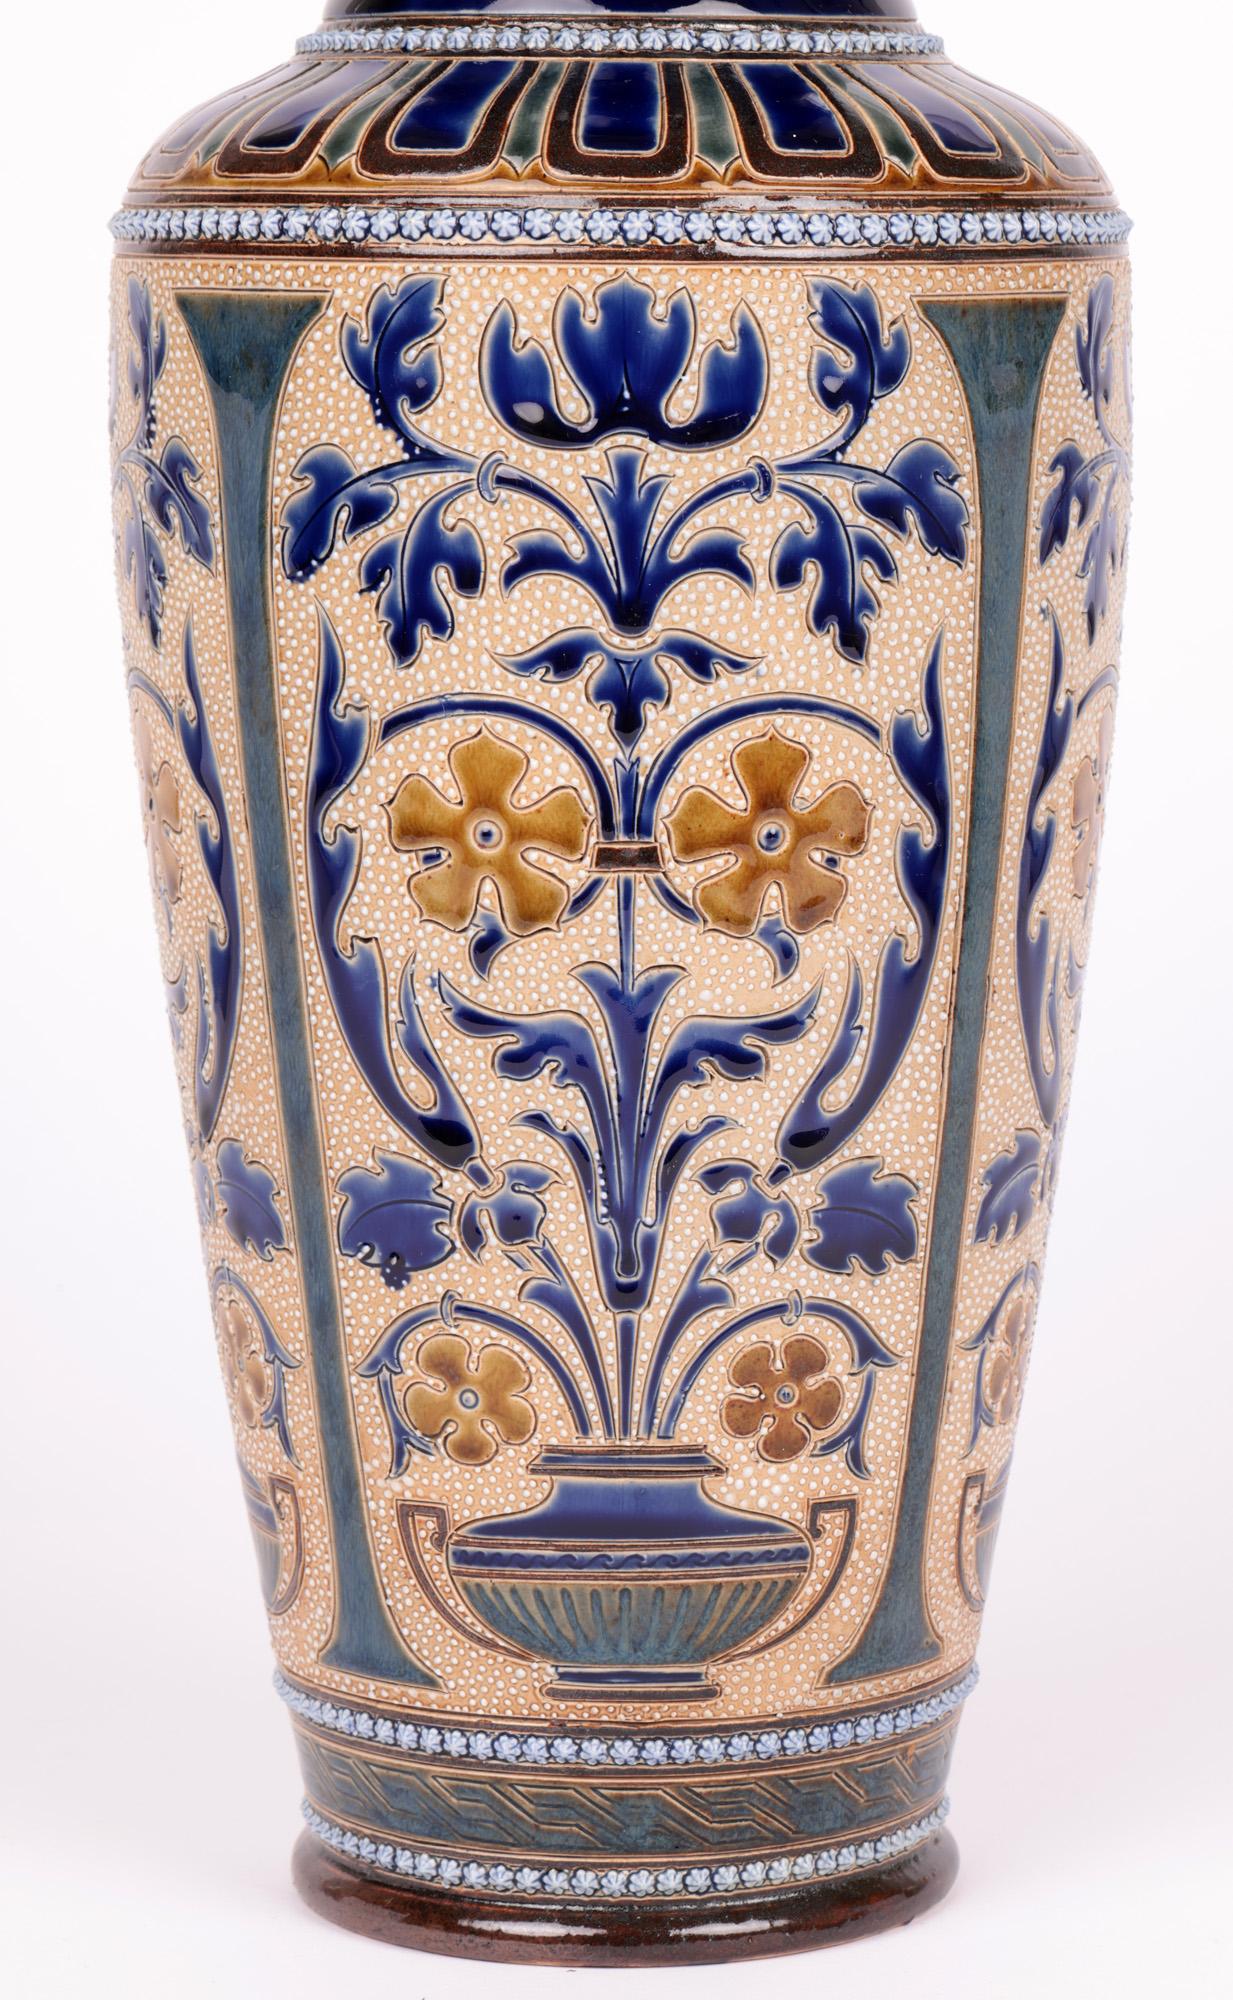 A large, impressive and rare aesthetic movement Doulton Lambeth vase by renowned artists George Hugo Tabor, Eliza L Hubert and Ernest R. Bishop whose work is rare and dated 1883. The tall stoneware vase stands on a narrow round foot with a tall